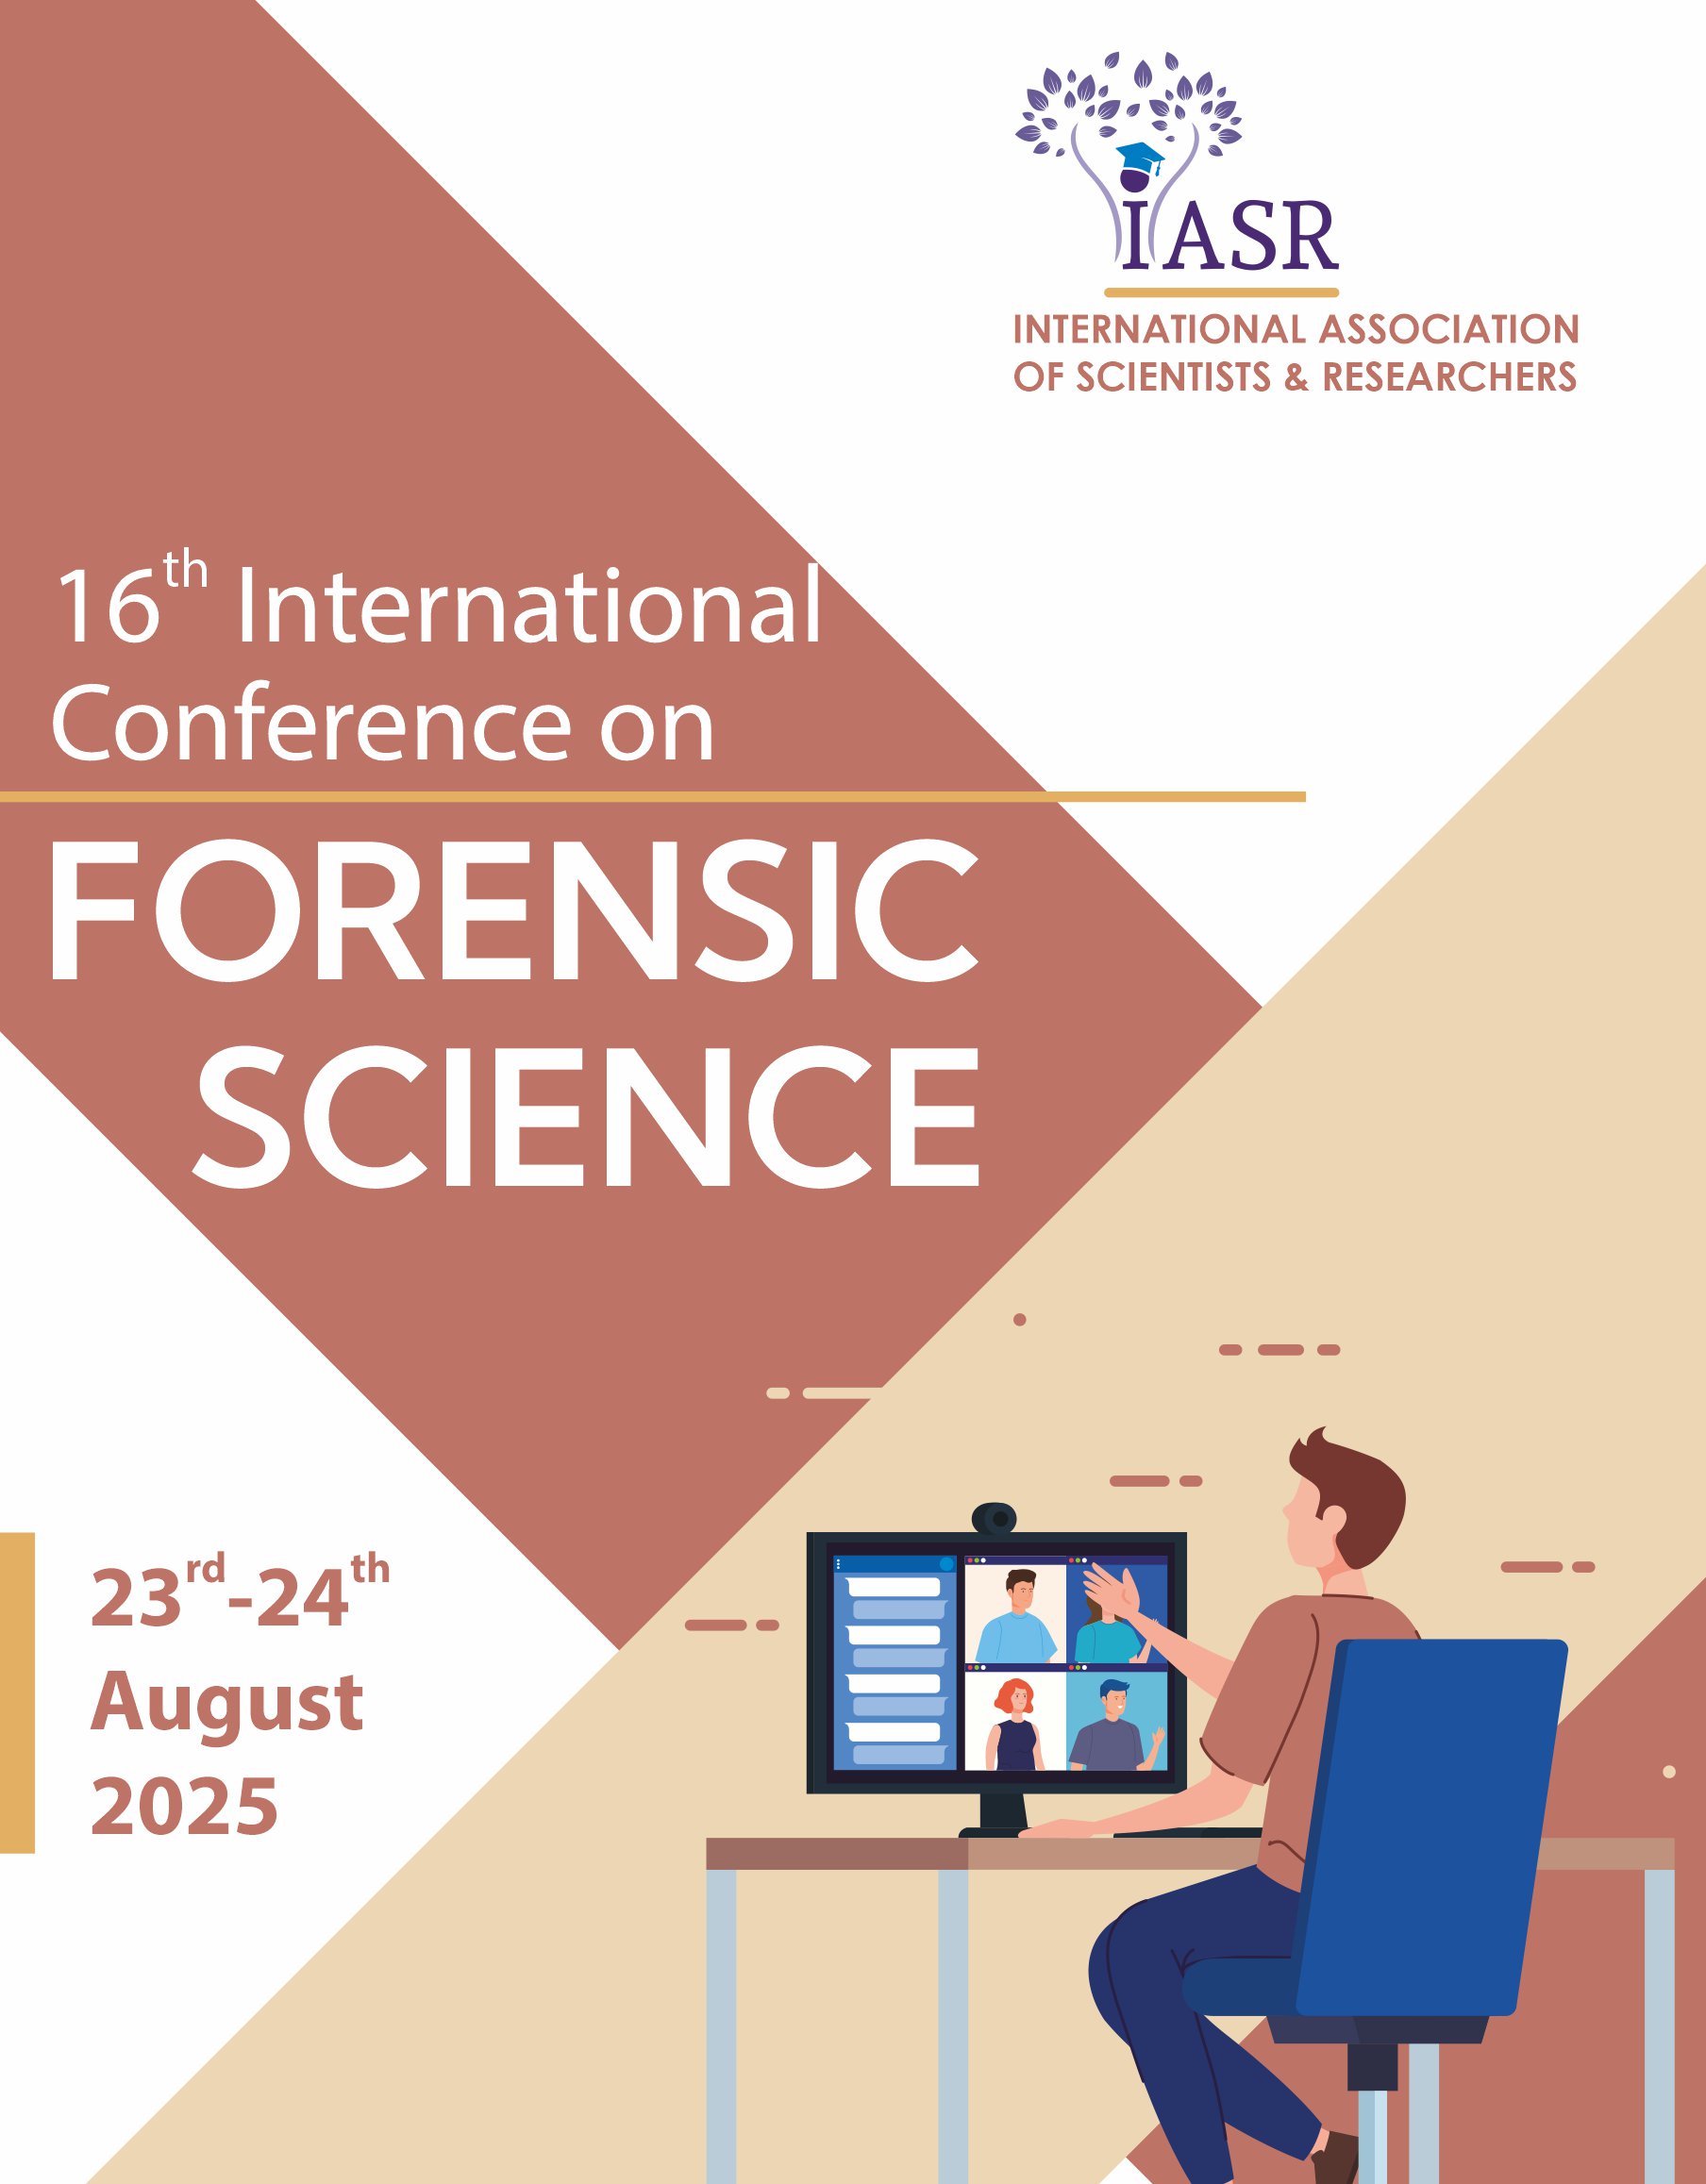 16th IASR International Conference on Forensic Science